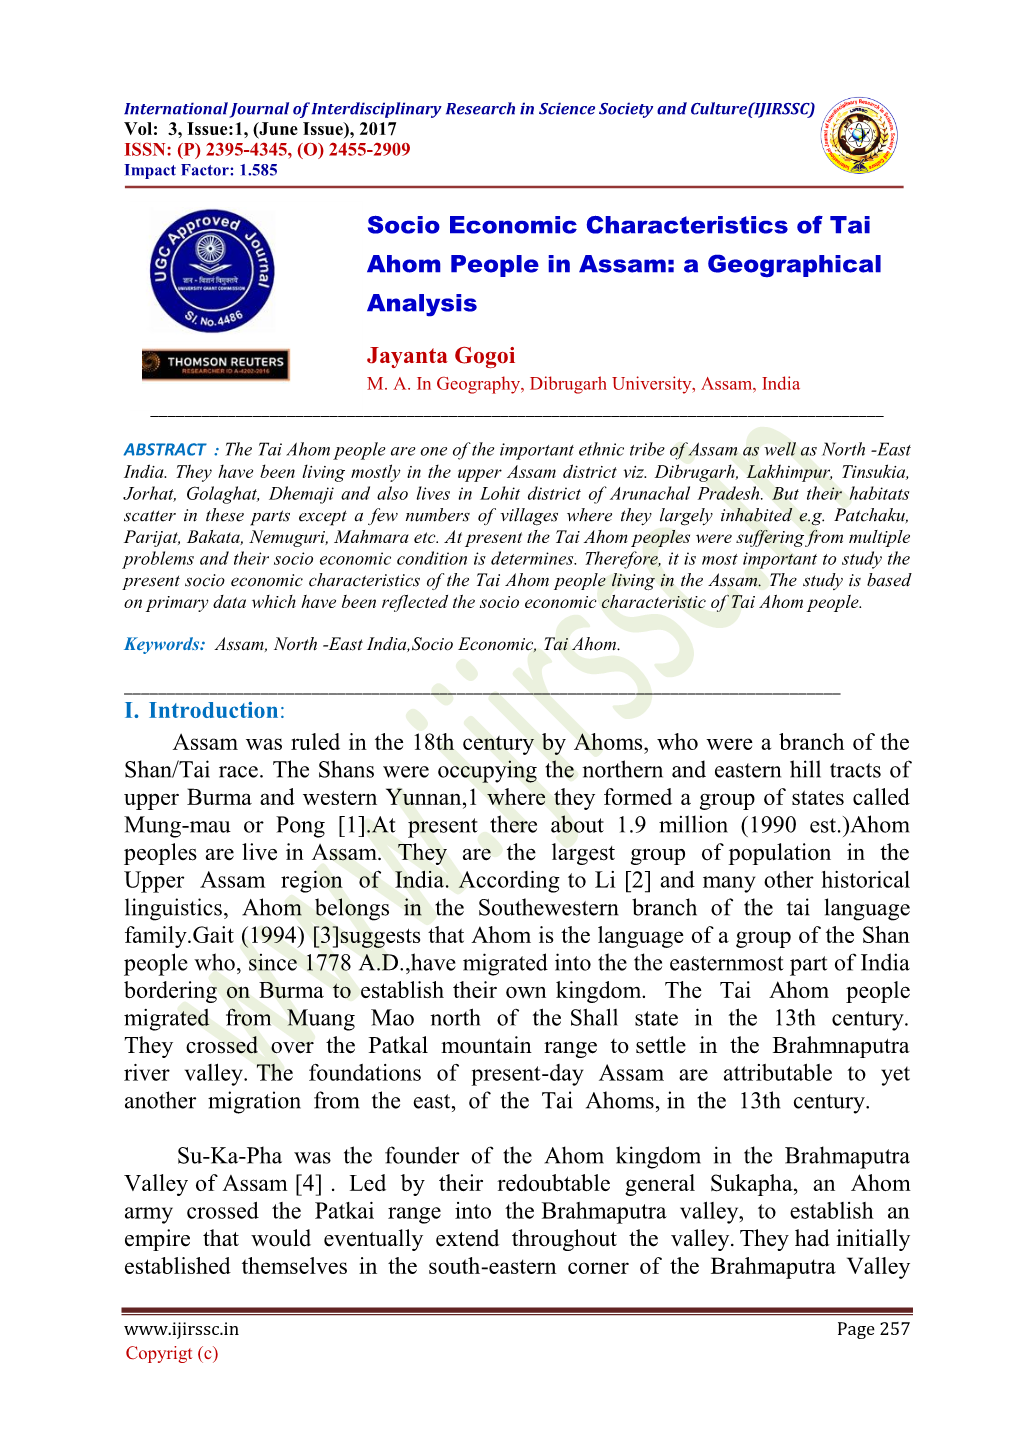 Socio Economic Characteristics of Tai Ahom People in Assam: a Geographical Analysis